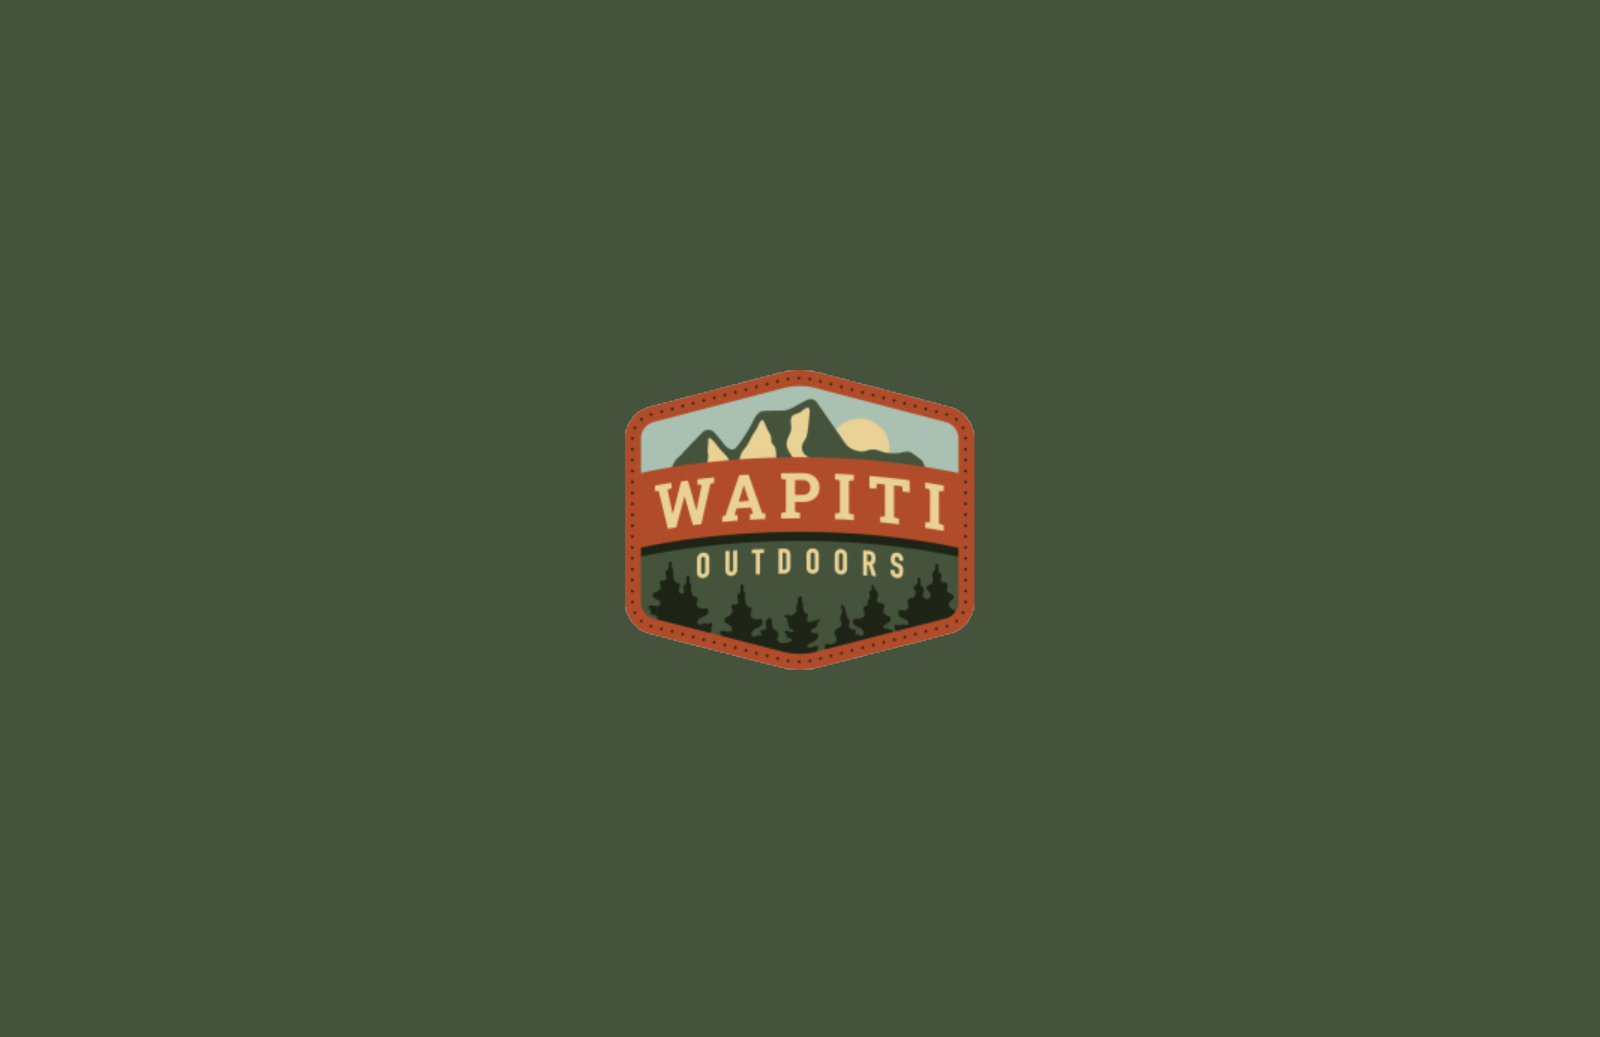 What does Wapiti mean?